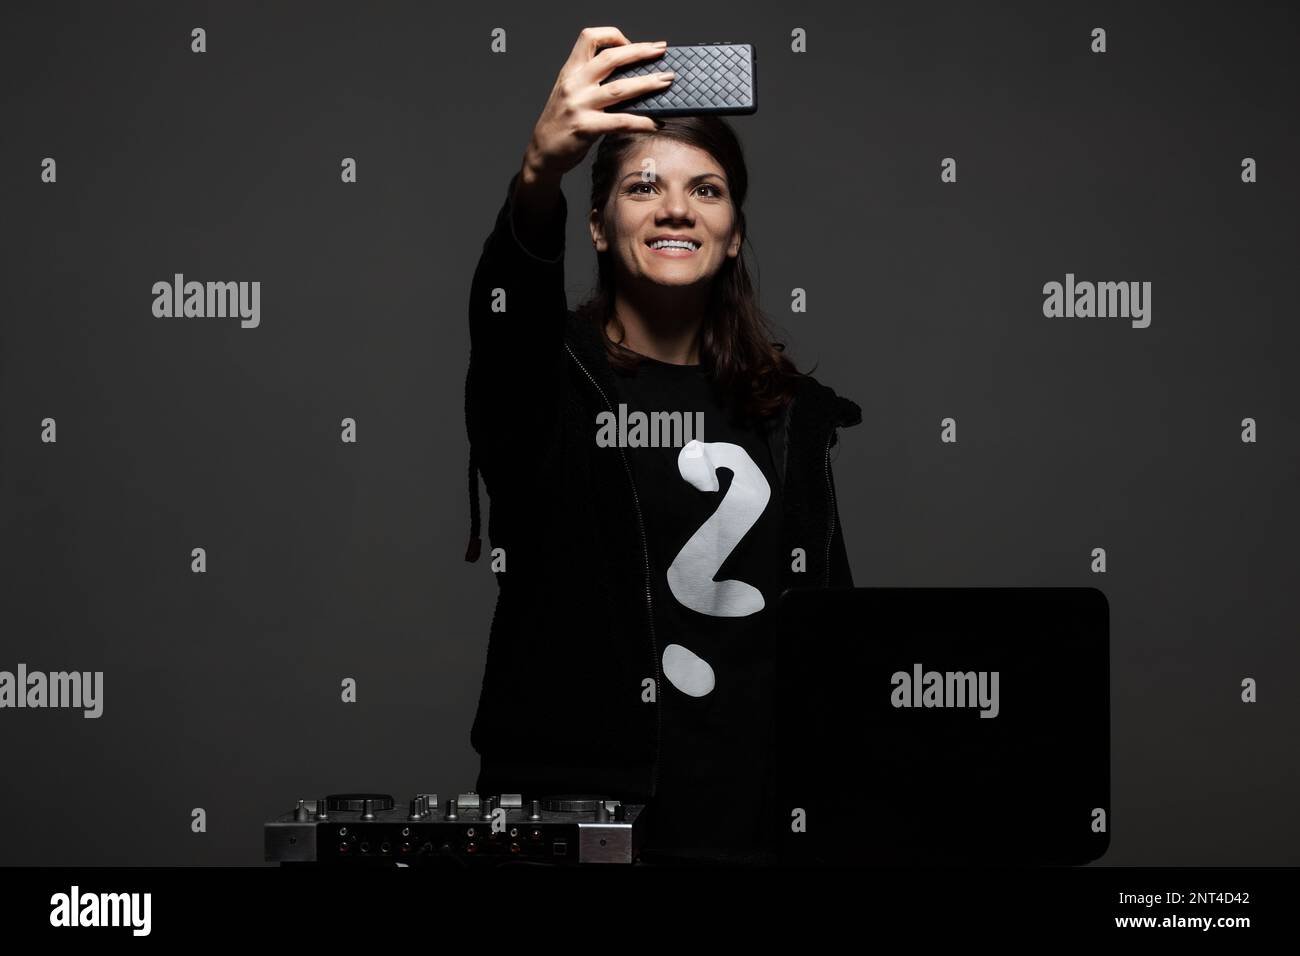 Female DJ on a mixer. Girl playing texhno music and takin photos with phone. Stock Photo